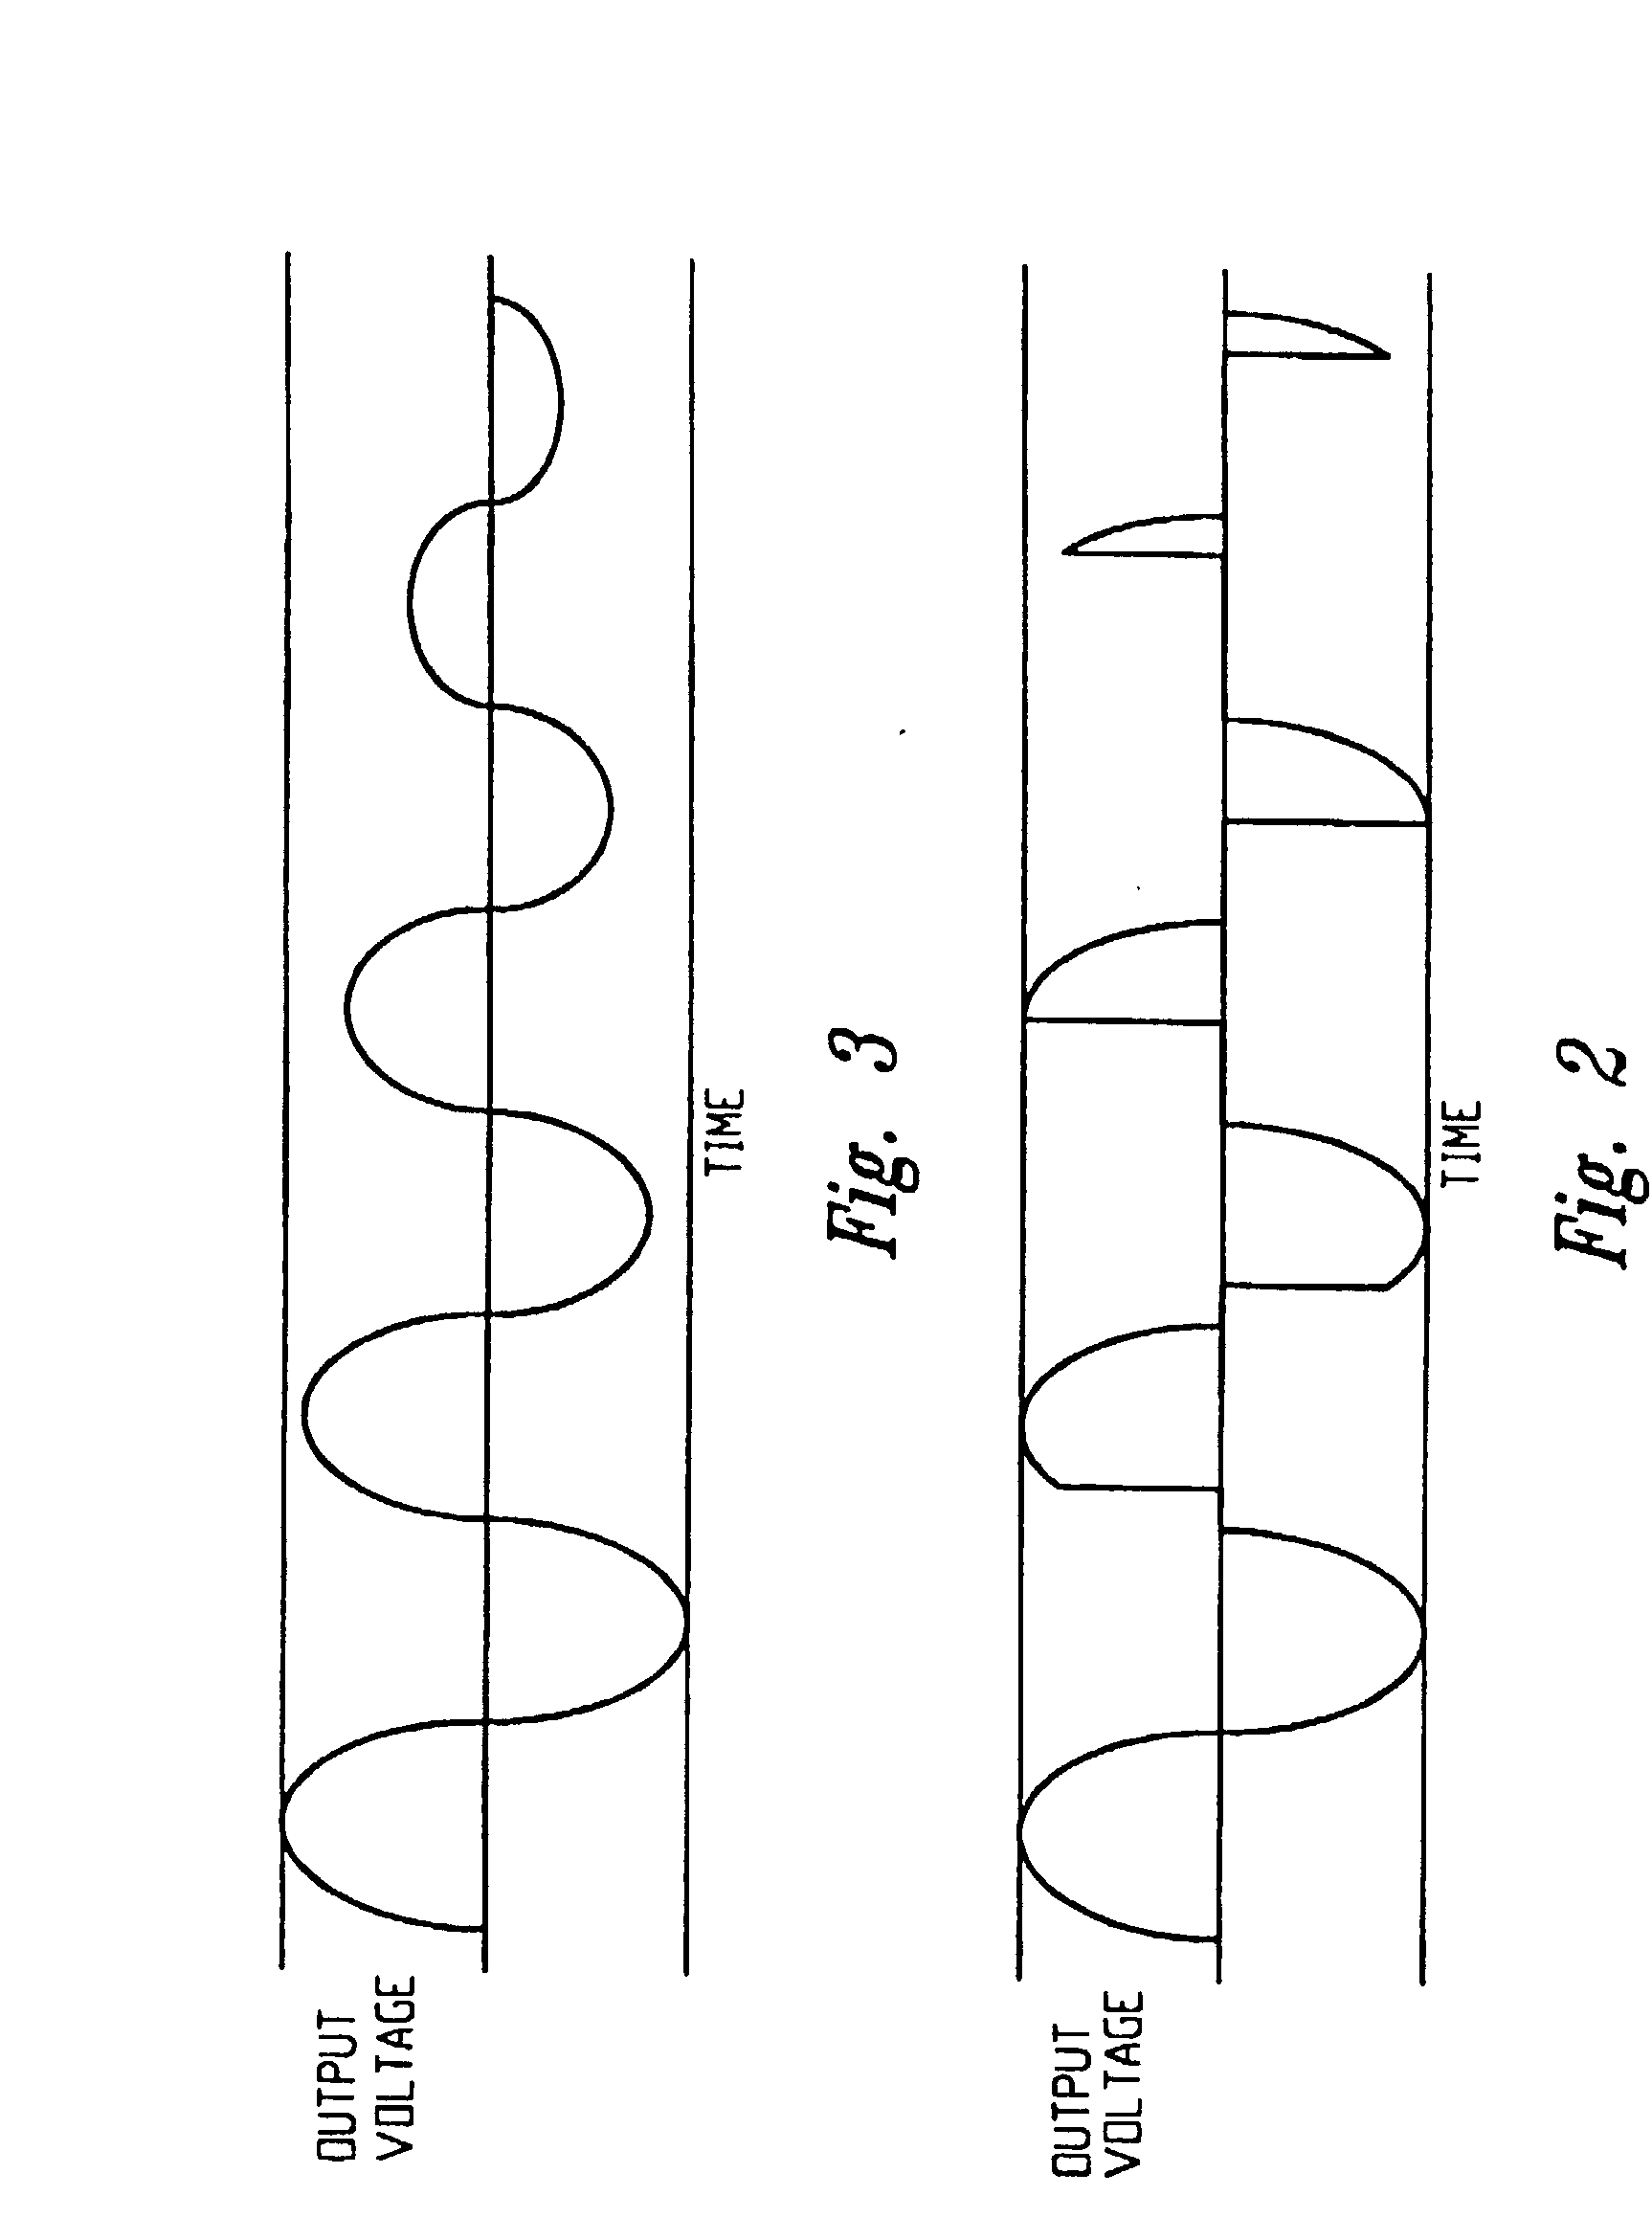 Method and apparatus for electronic power control